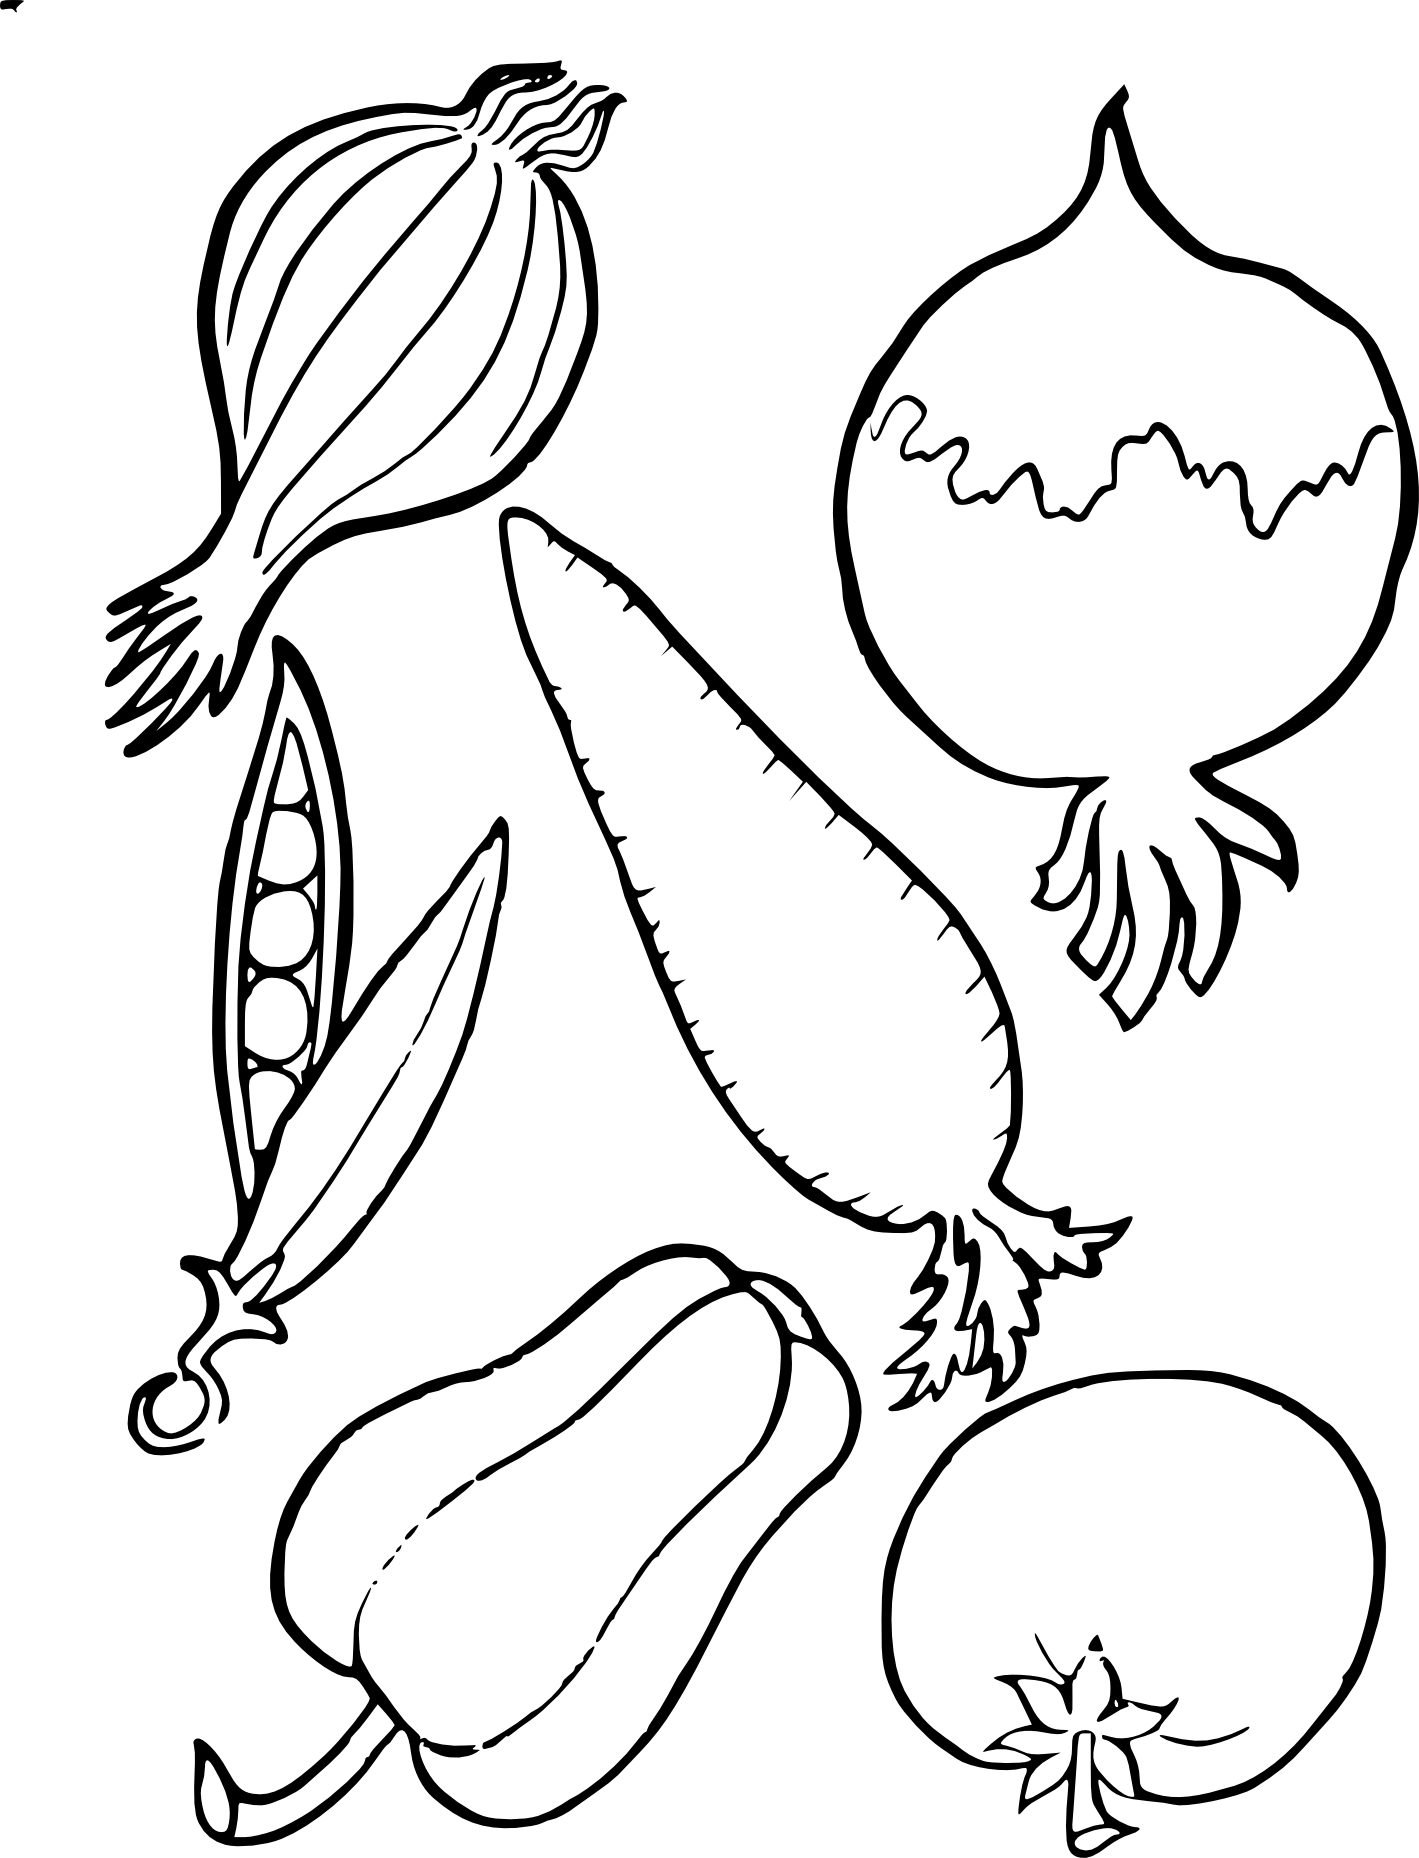 Vegetables coloring page